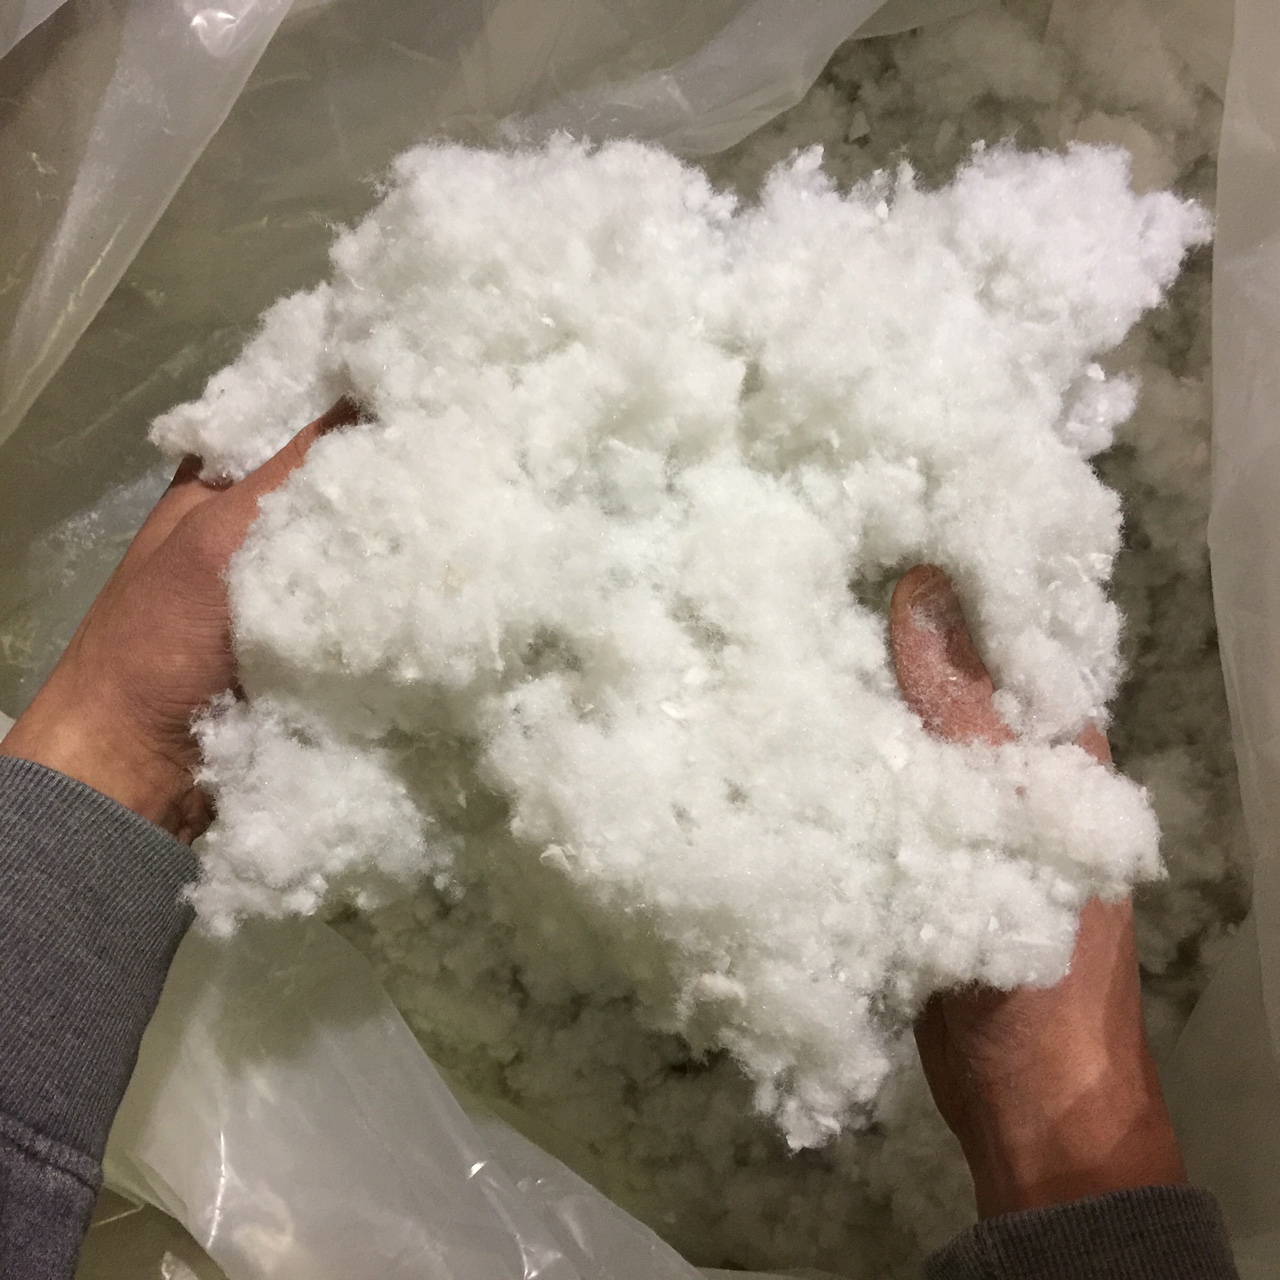 SHREDDED DACRON FIBRE - The Foam Shop [removed]scohi[removed]